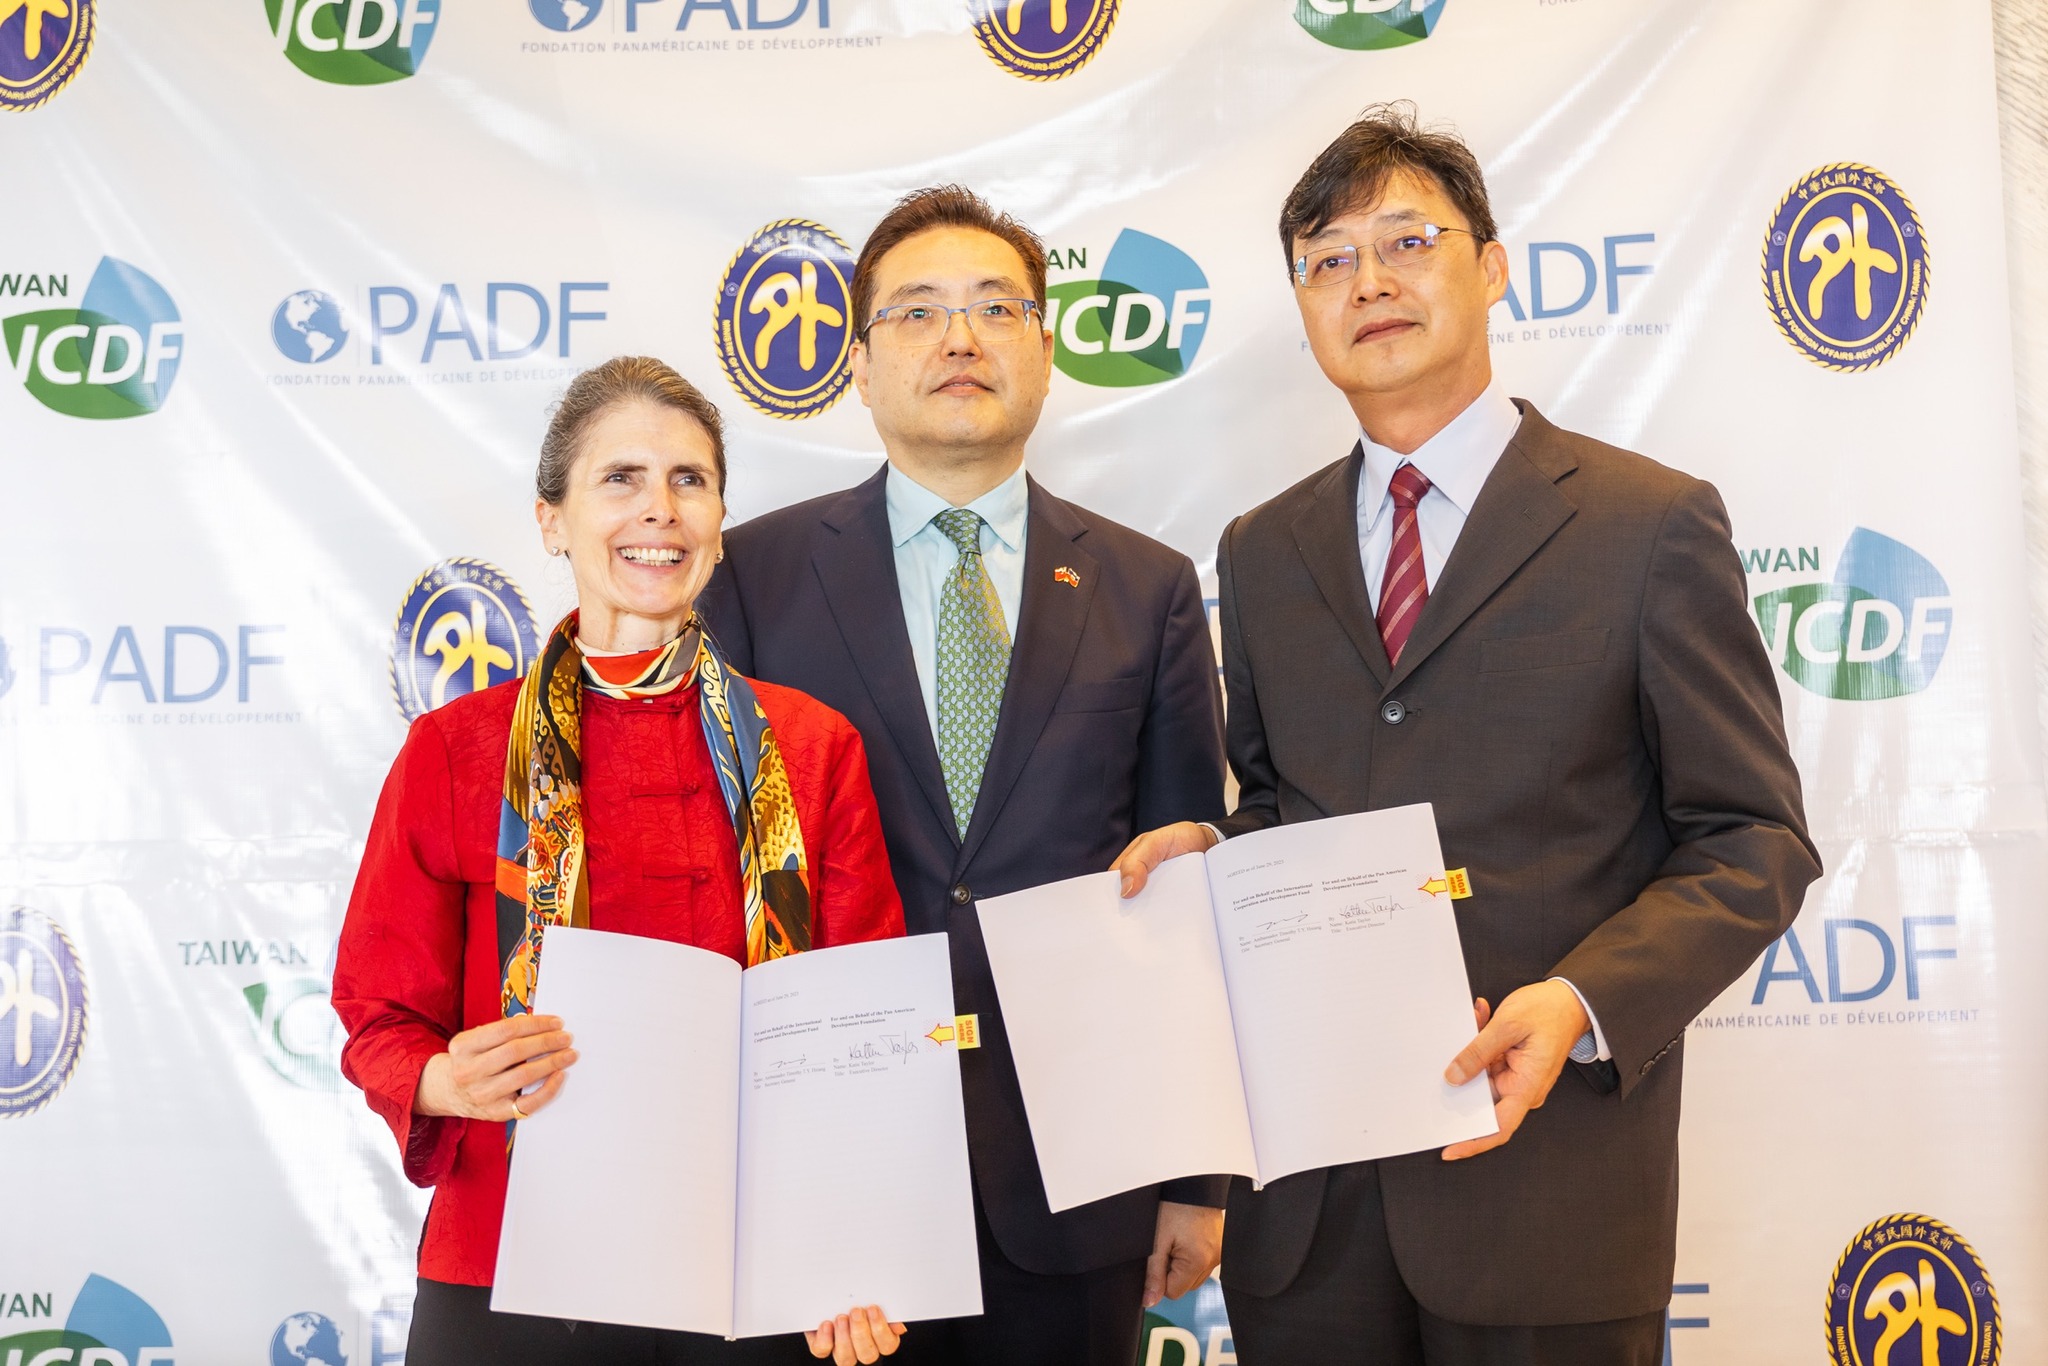 TaiwanICDF and PADF to co-create a credit guarantee facility to promote women’s economic empowerment in Haiti